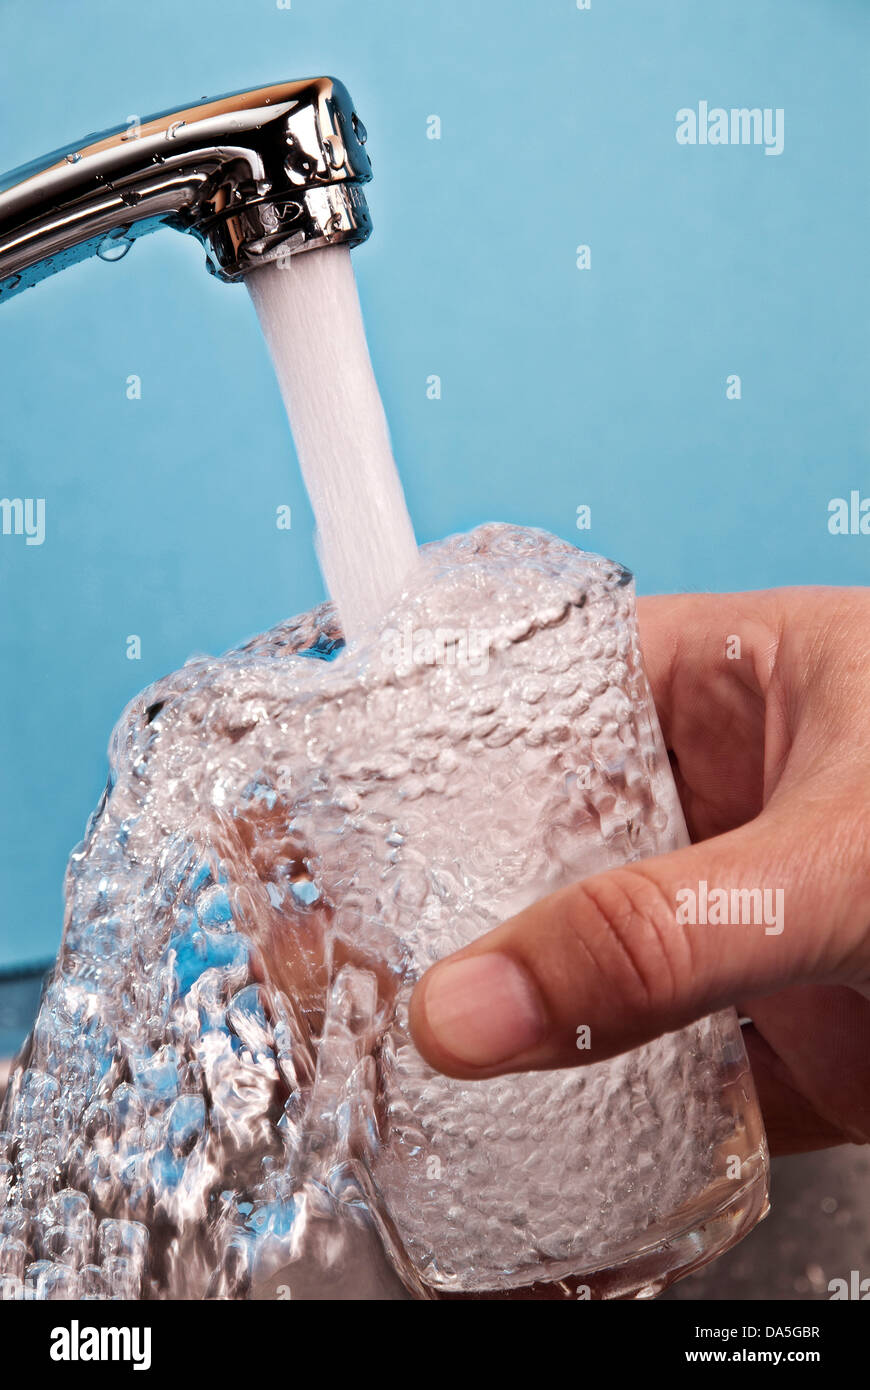 Water flowing from a faucet into a glass. Stock Photo